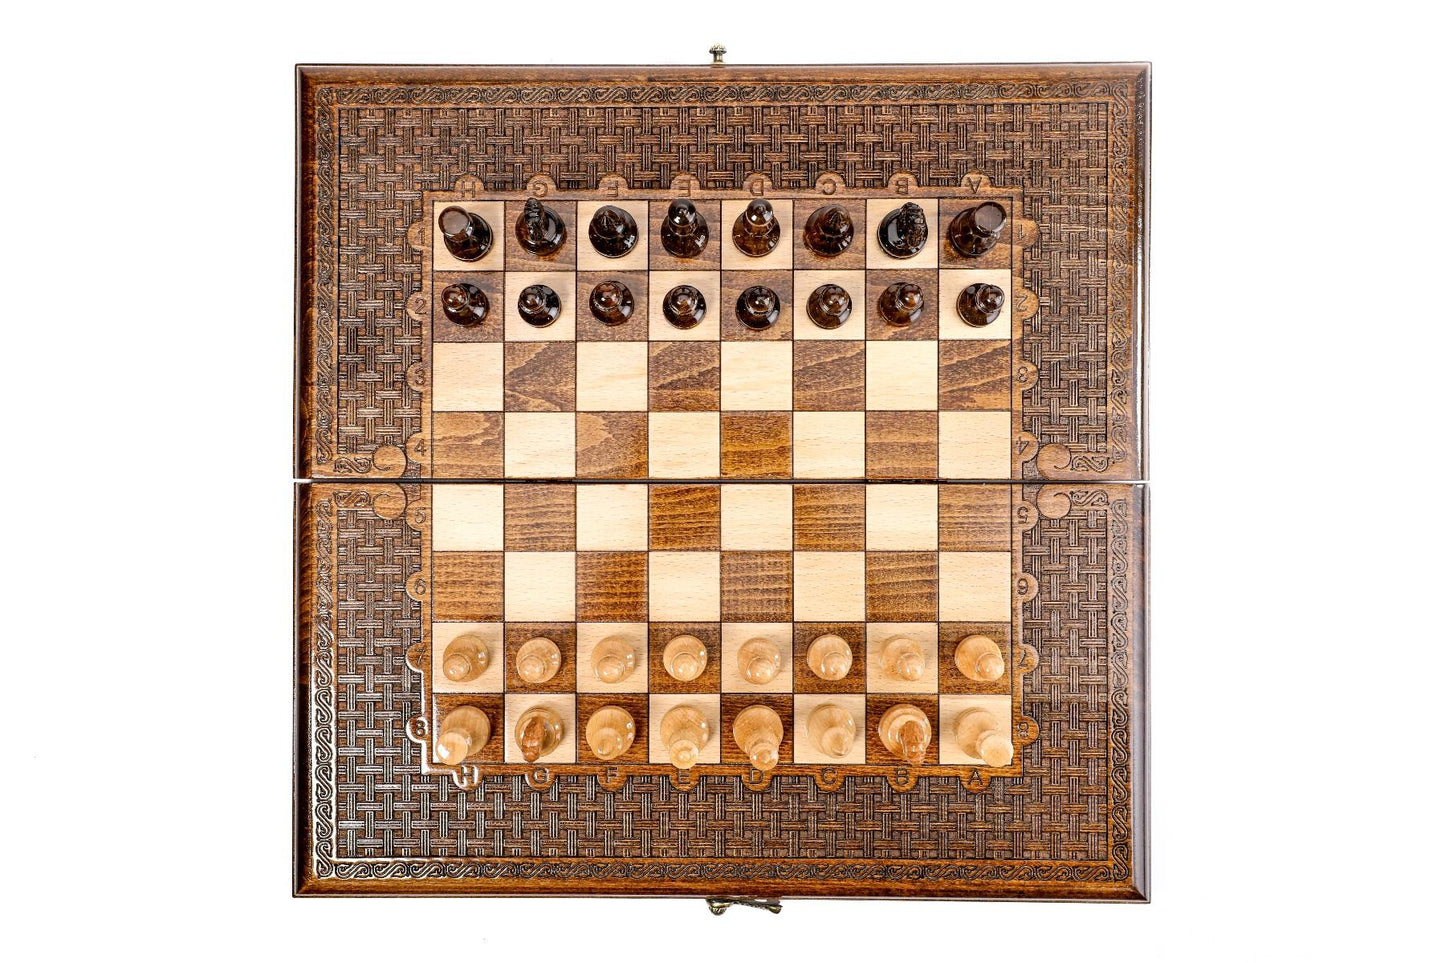 A testament to skilled artisanship, this unique set invites players to explore the strategic depths of chess and backgammon within a framework of unparalleled beauty.